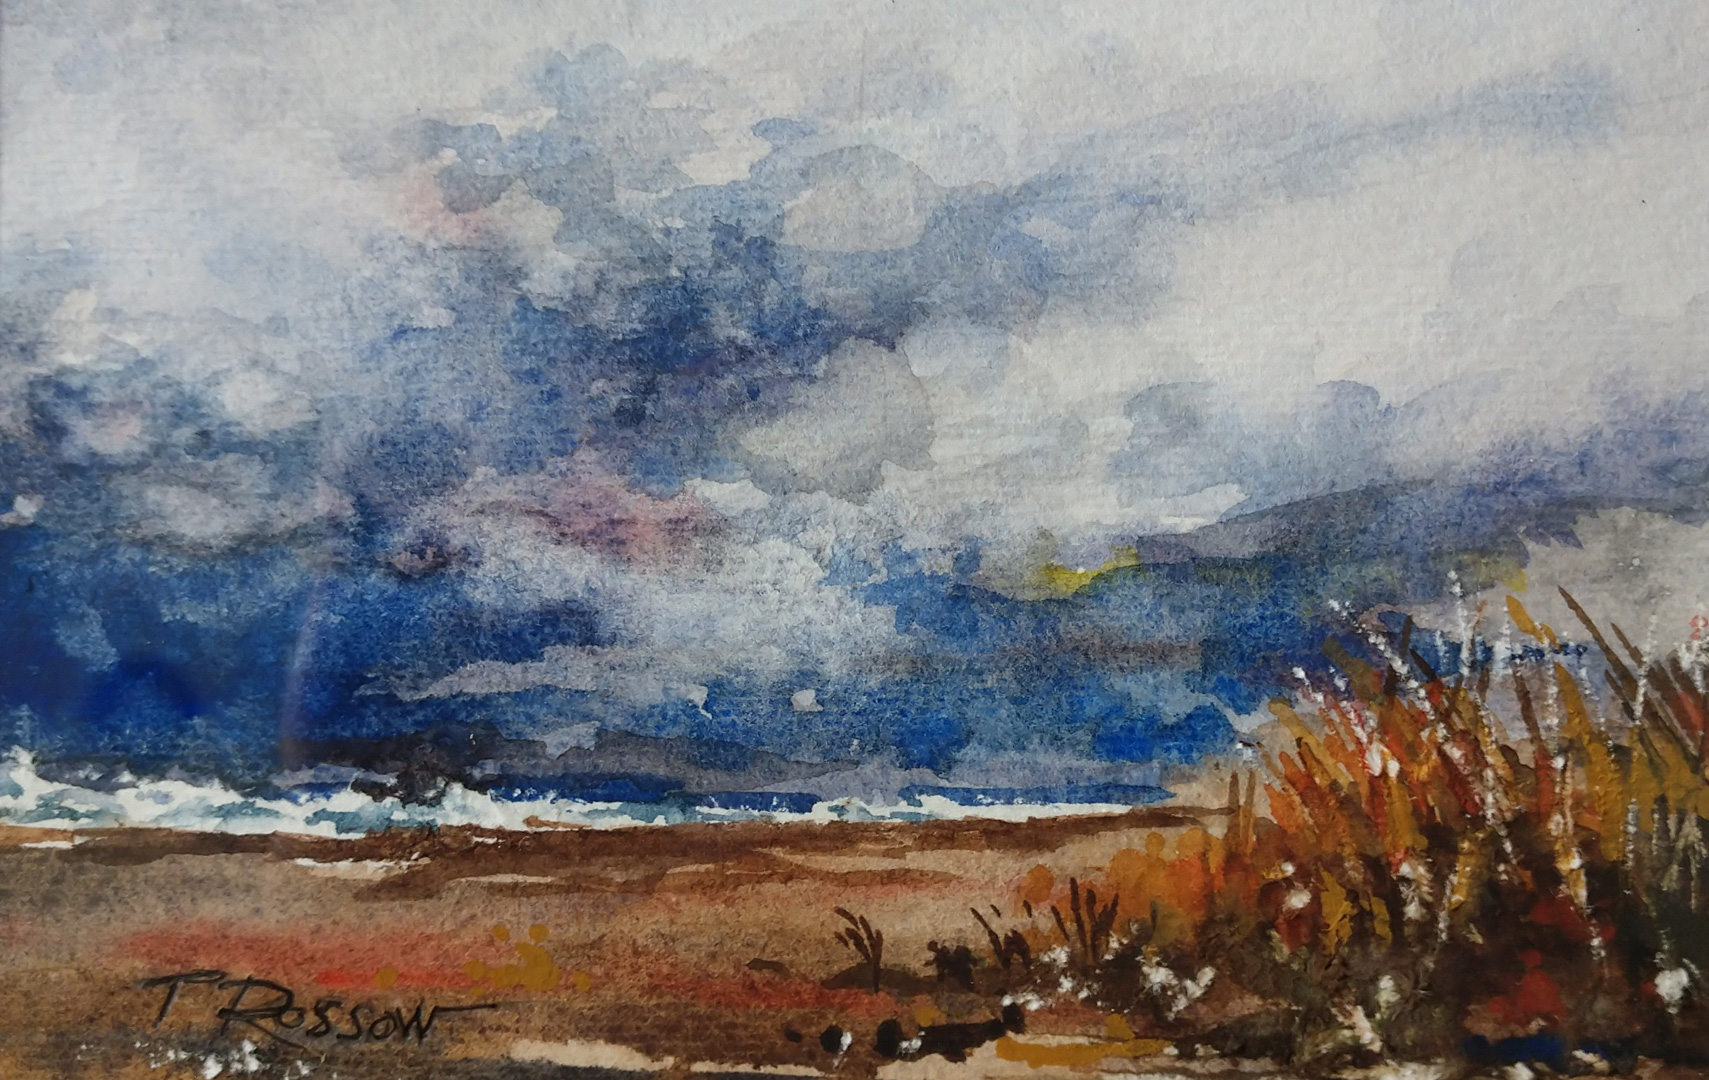 Approaching Storm, Ocean Shores, WA, Watercolor on paper, 7 x 5